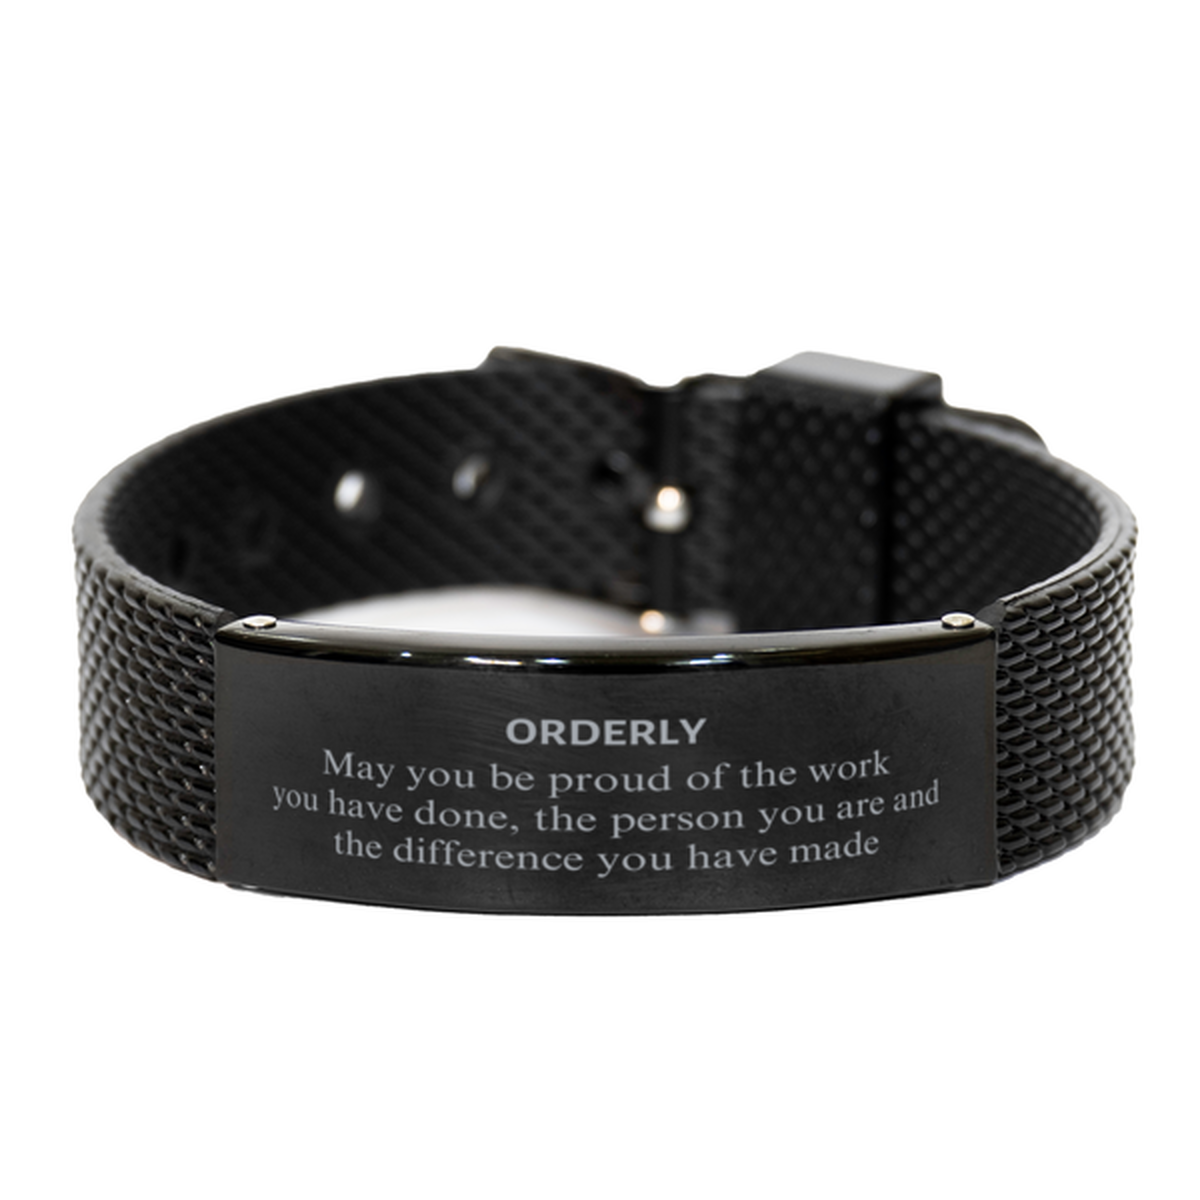 Orderly May you be proud of the work you have done, Retirement Orderly Black Shark Mesh Bracelet for Colleague Appreciation Gifts Amazing for Orderly